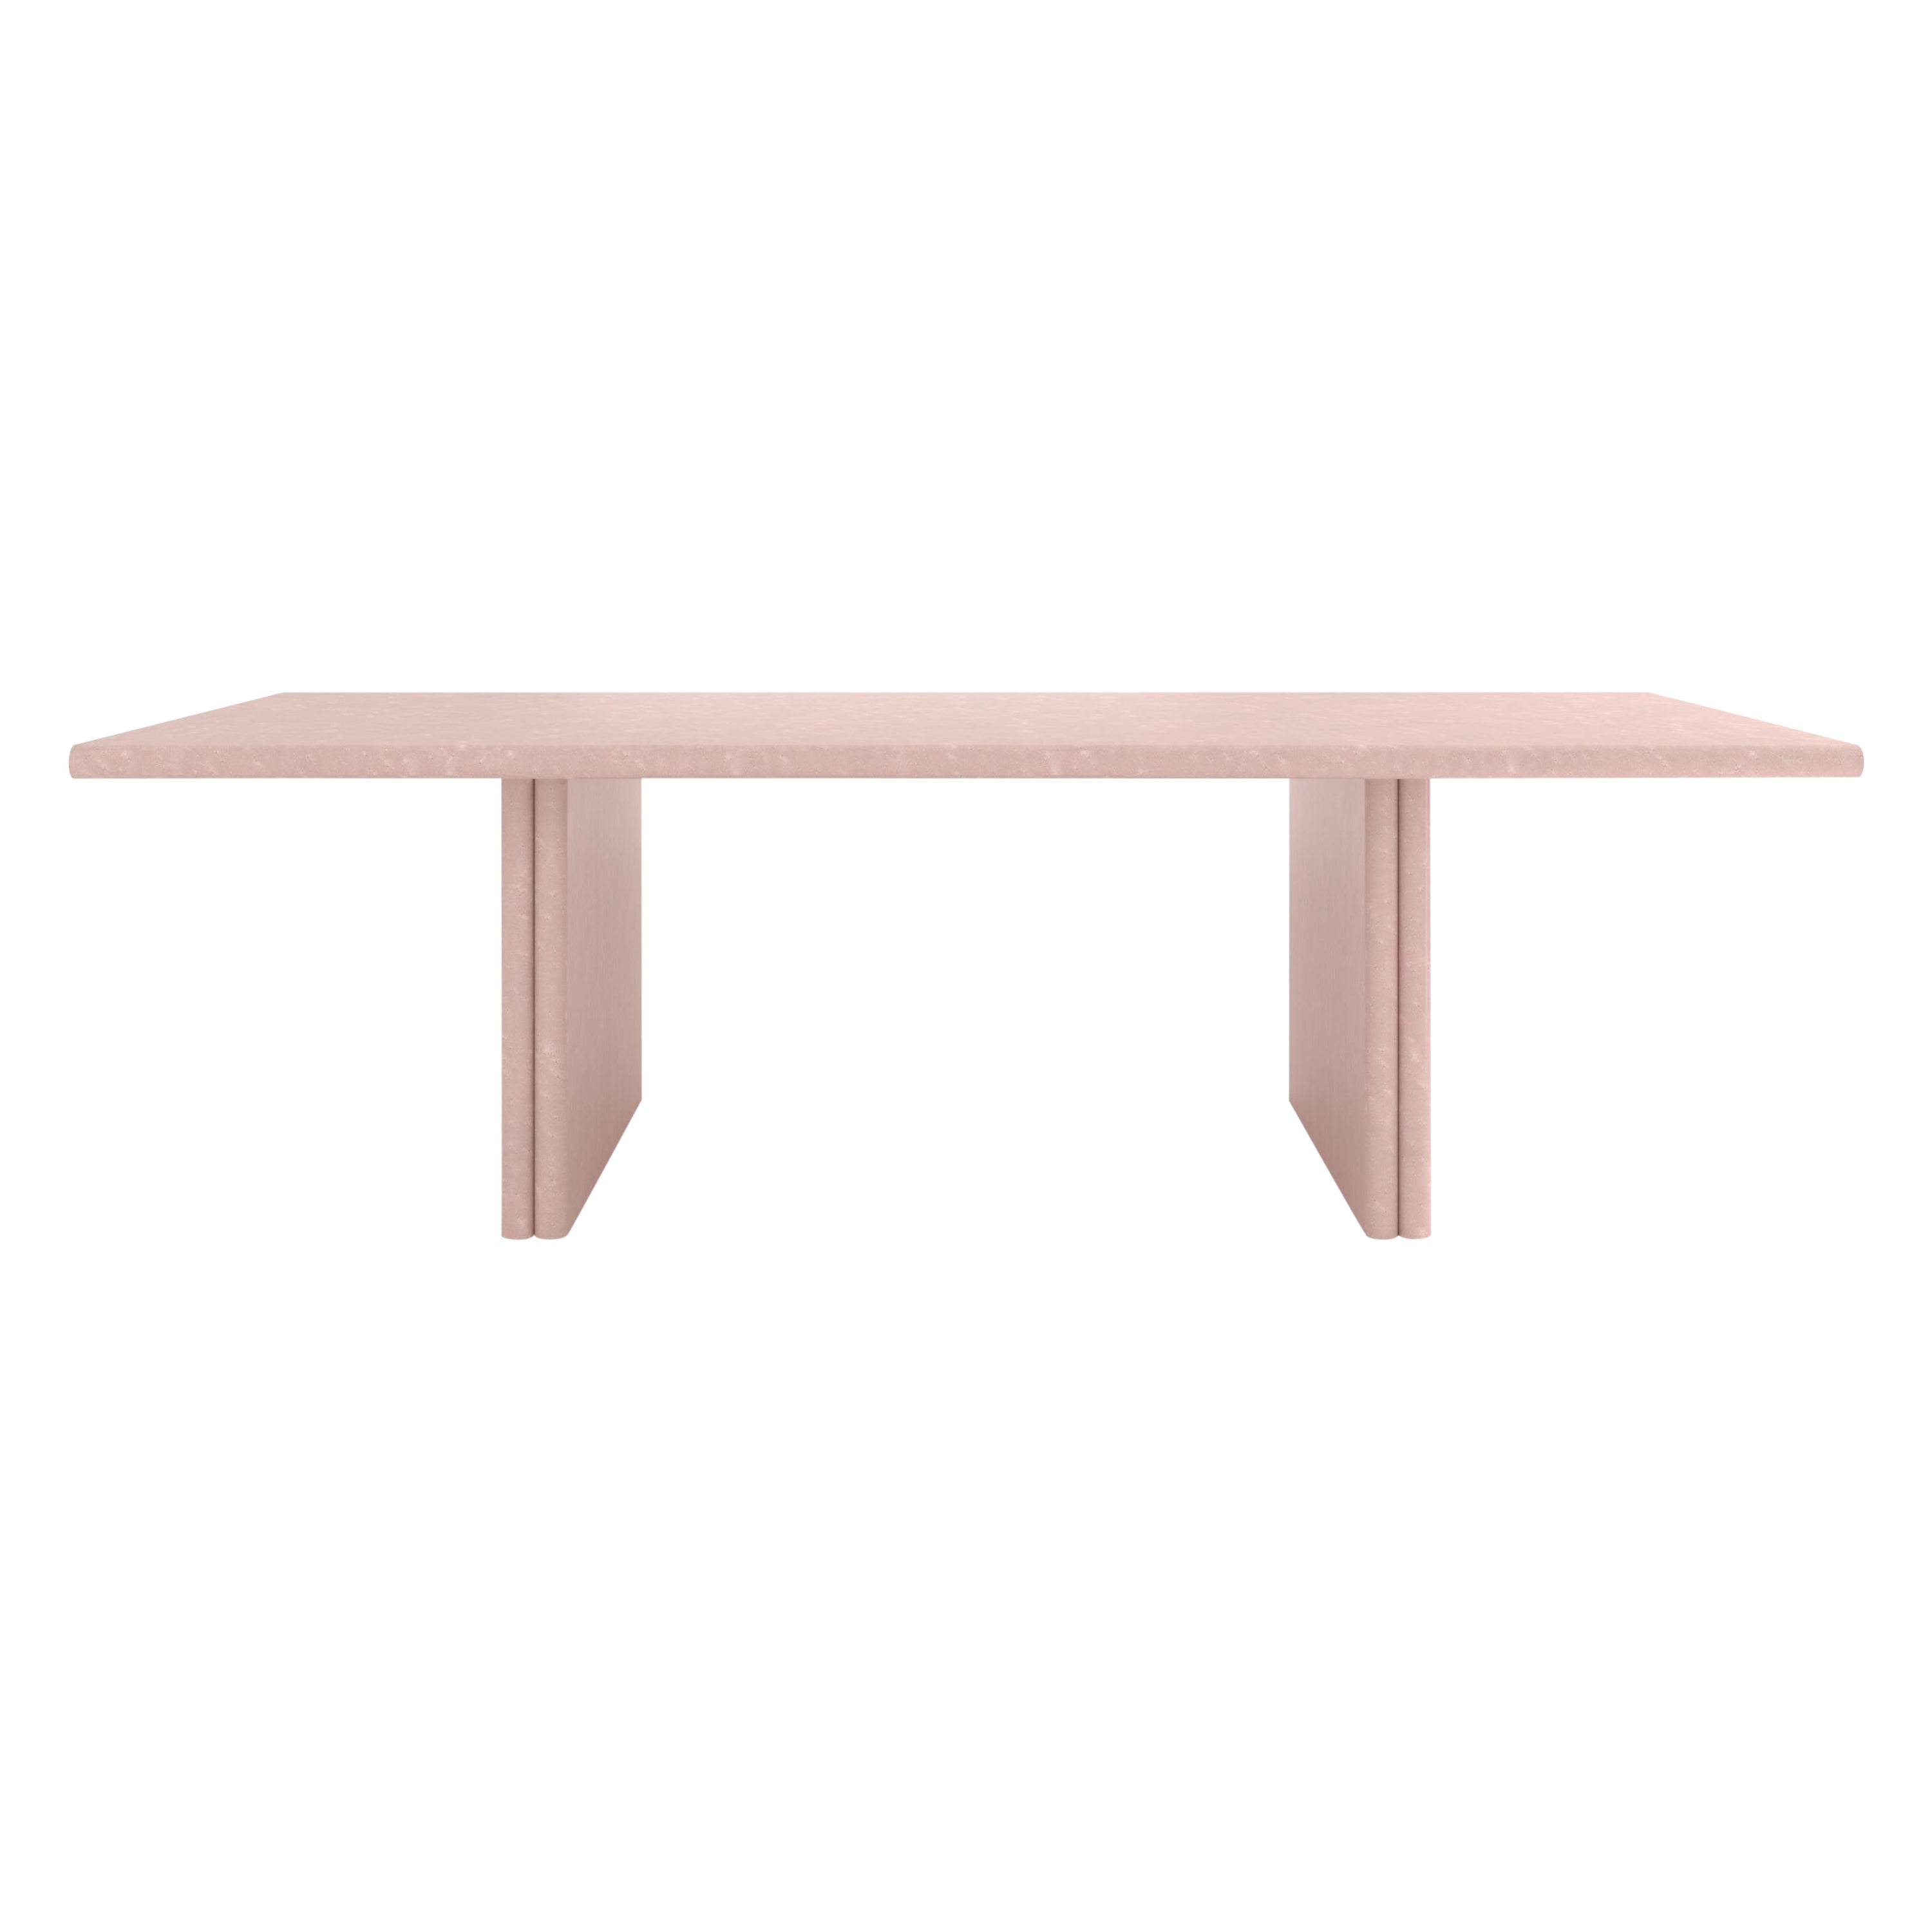 Jacques Pastel Pink Dining Table in Bird's Eye Maple by Fred&Juul For Sale